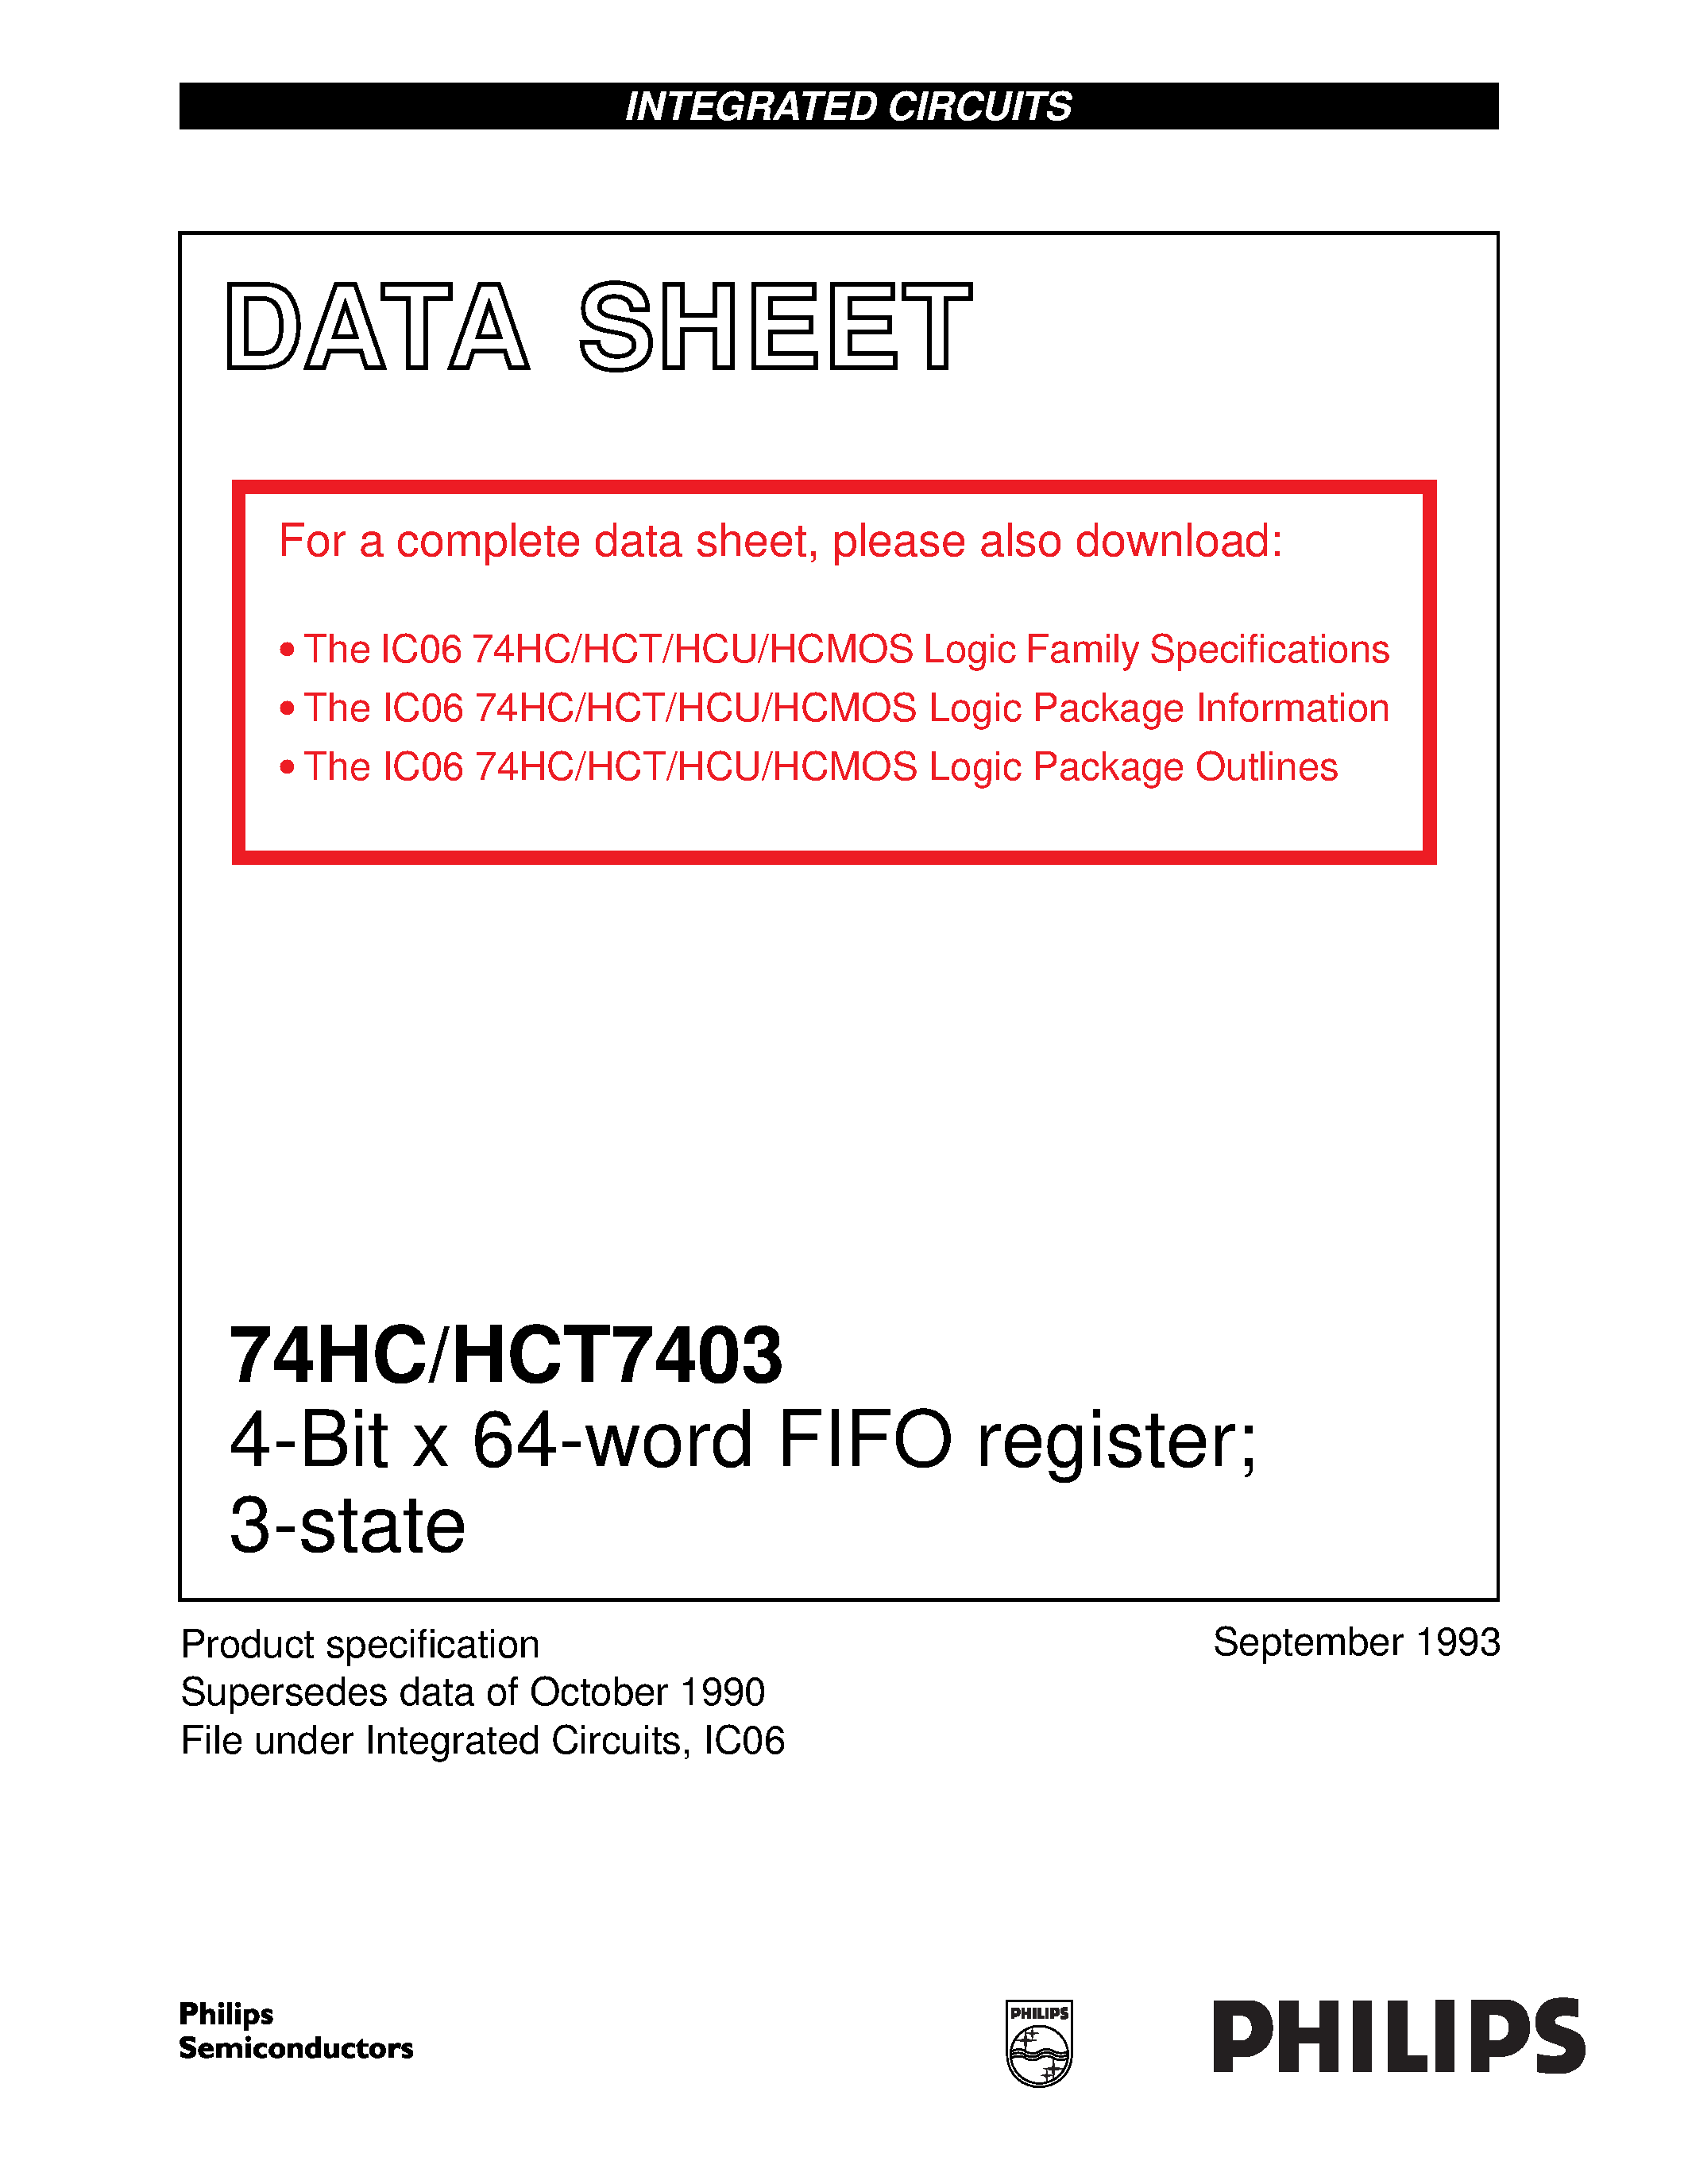 Datasheet 74HCT7403 - 4-Bit x 64-word FIFO register; 3-state page 1